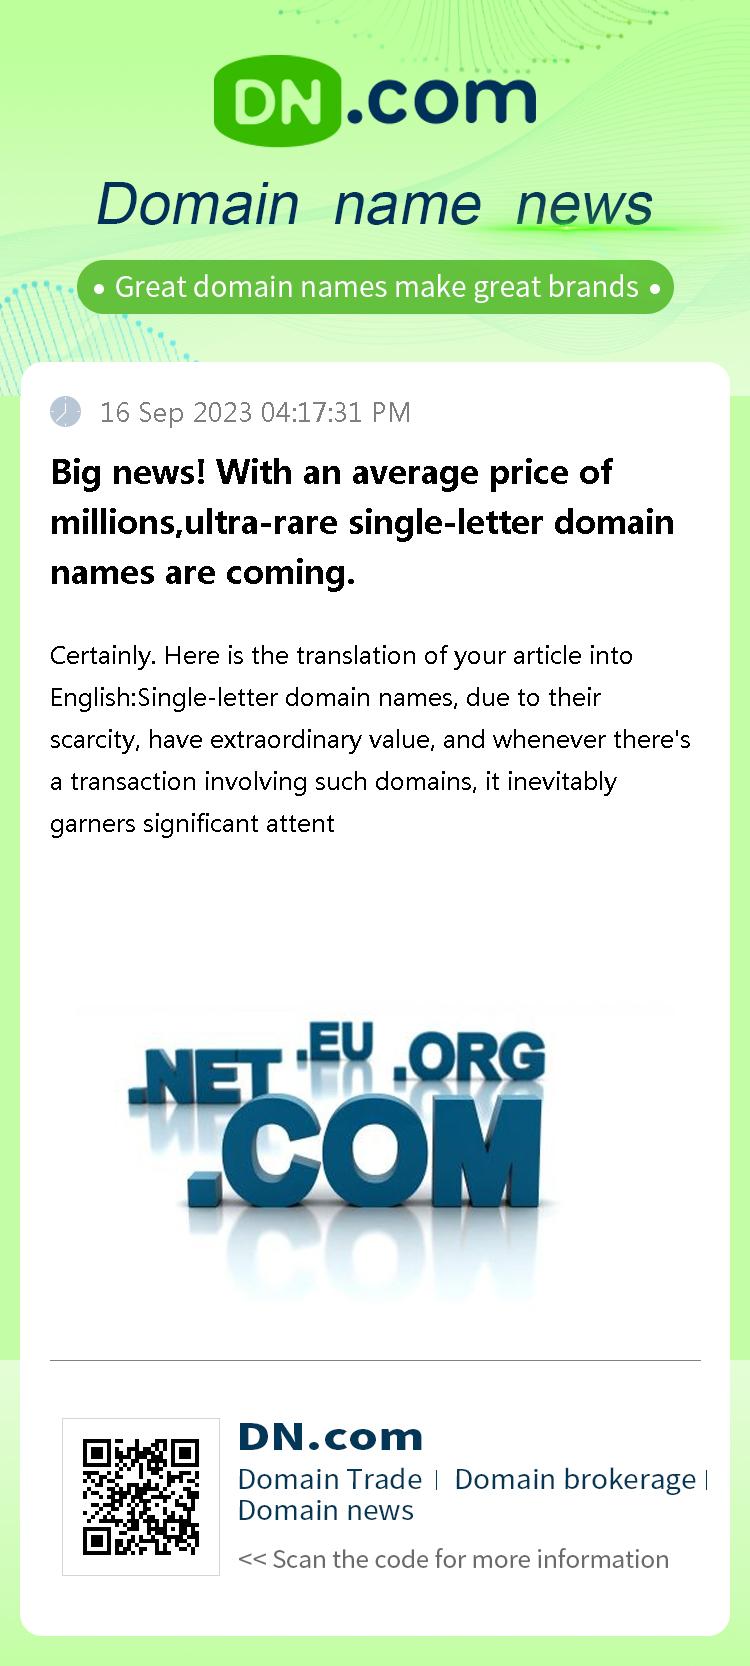 Big news! With an average price of millions,ultra-rare single-letter domain names are coming.